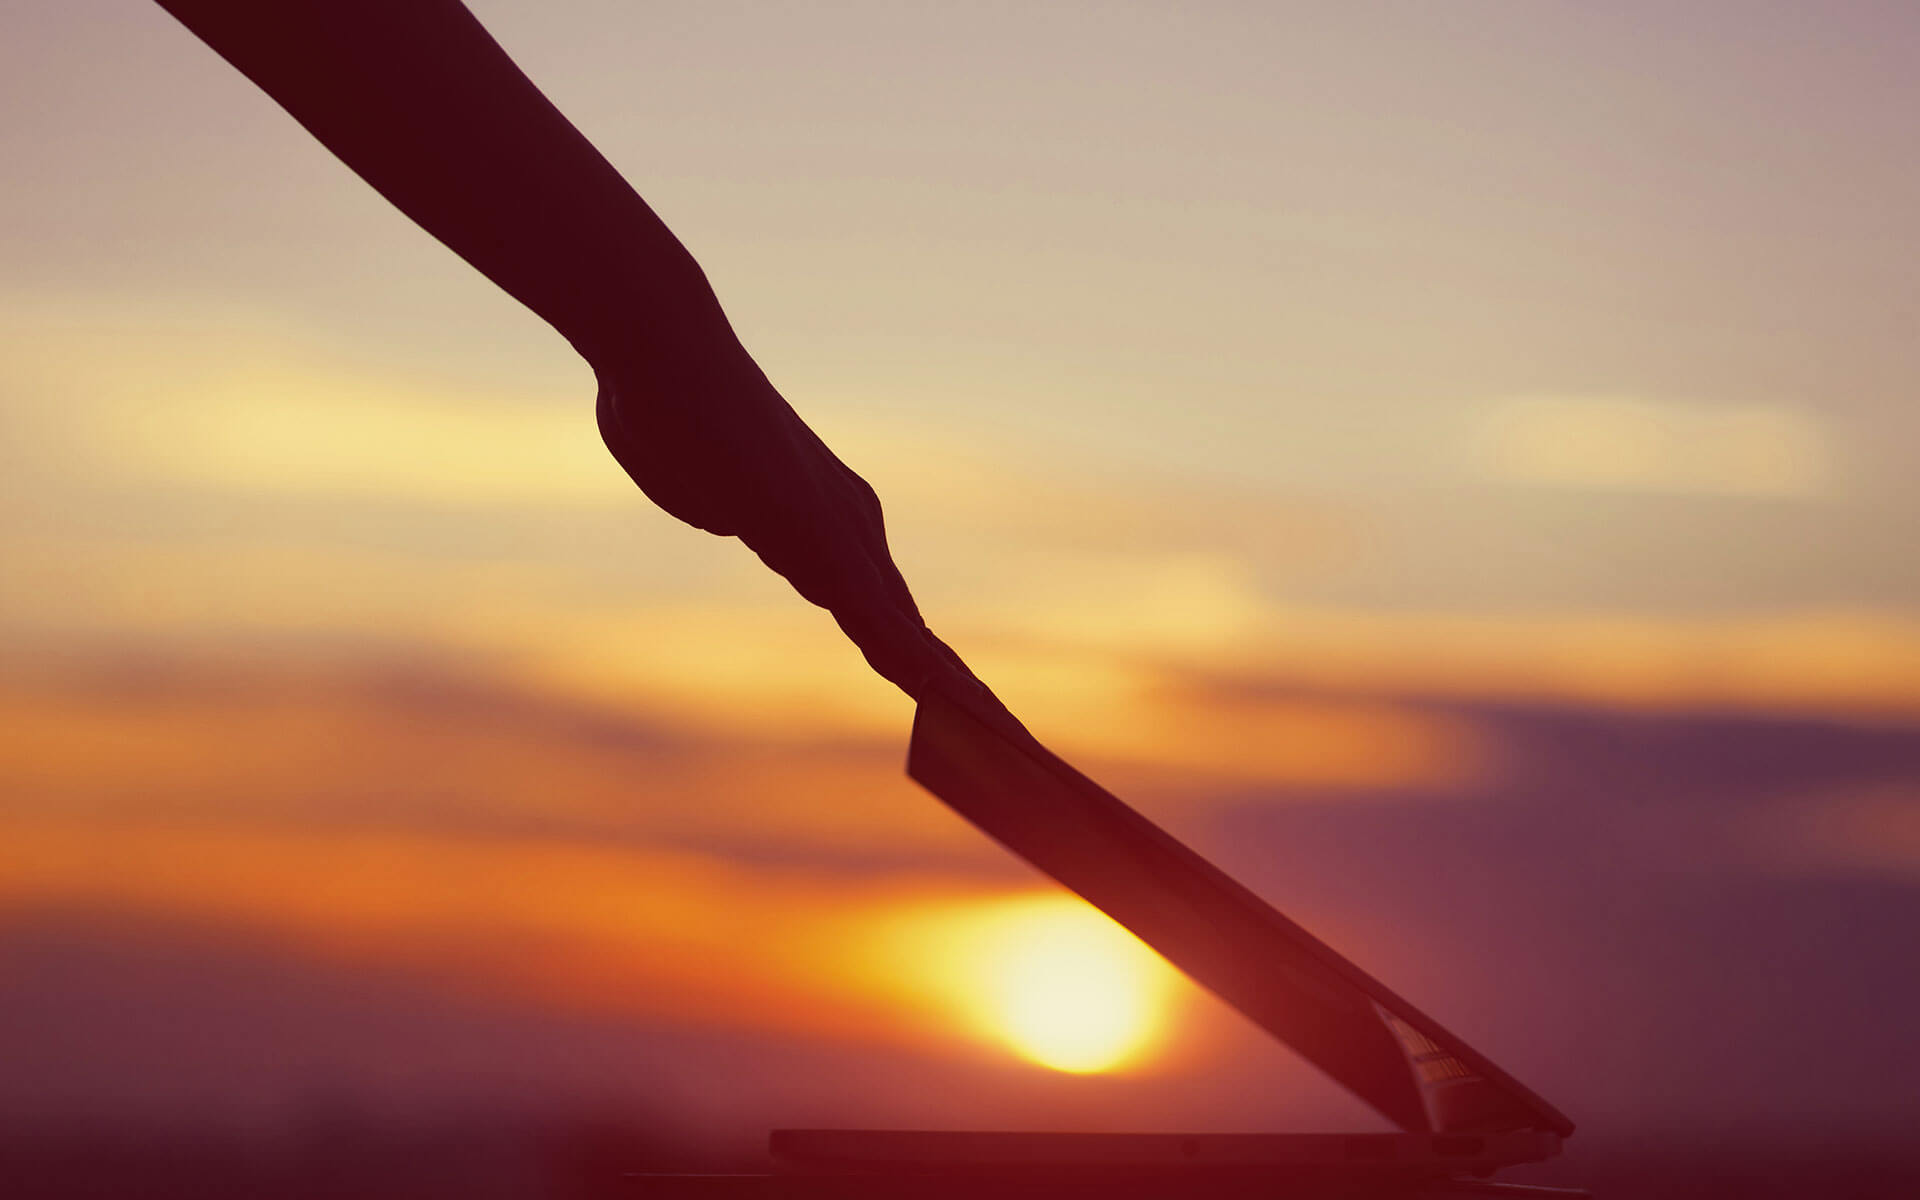 A person's arm extends across the frame to close a laptop with a sunset background